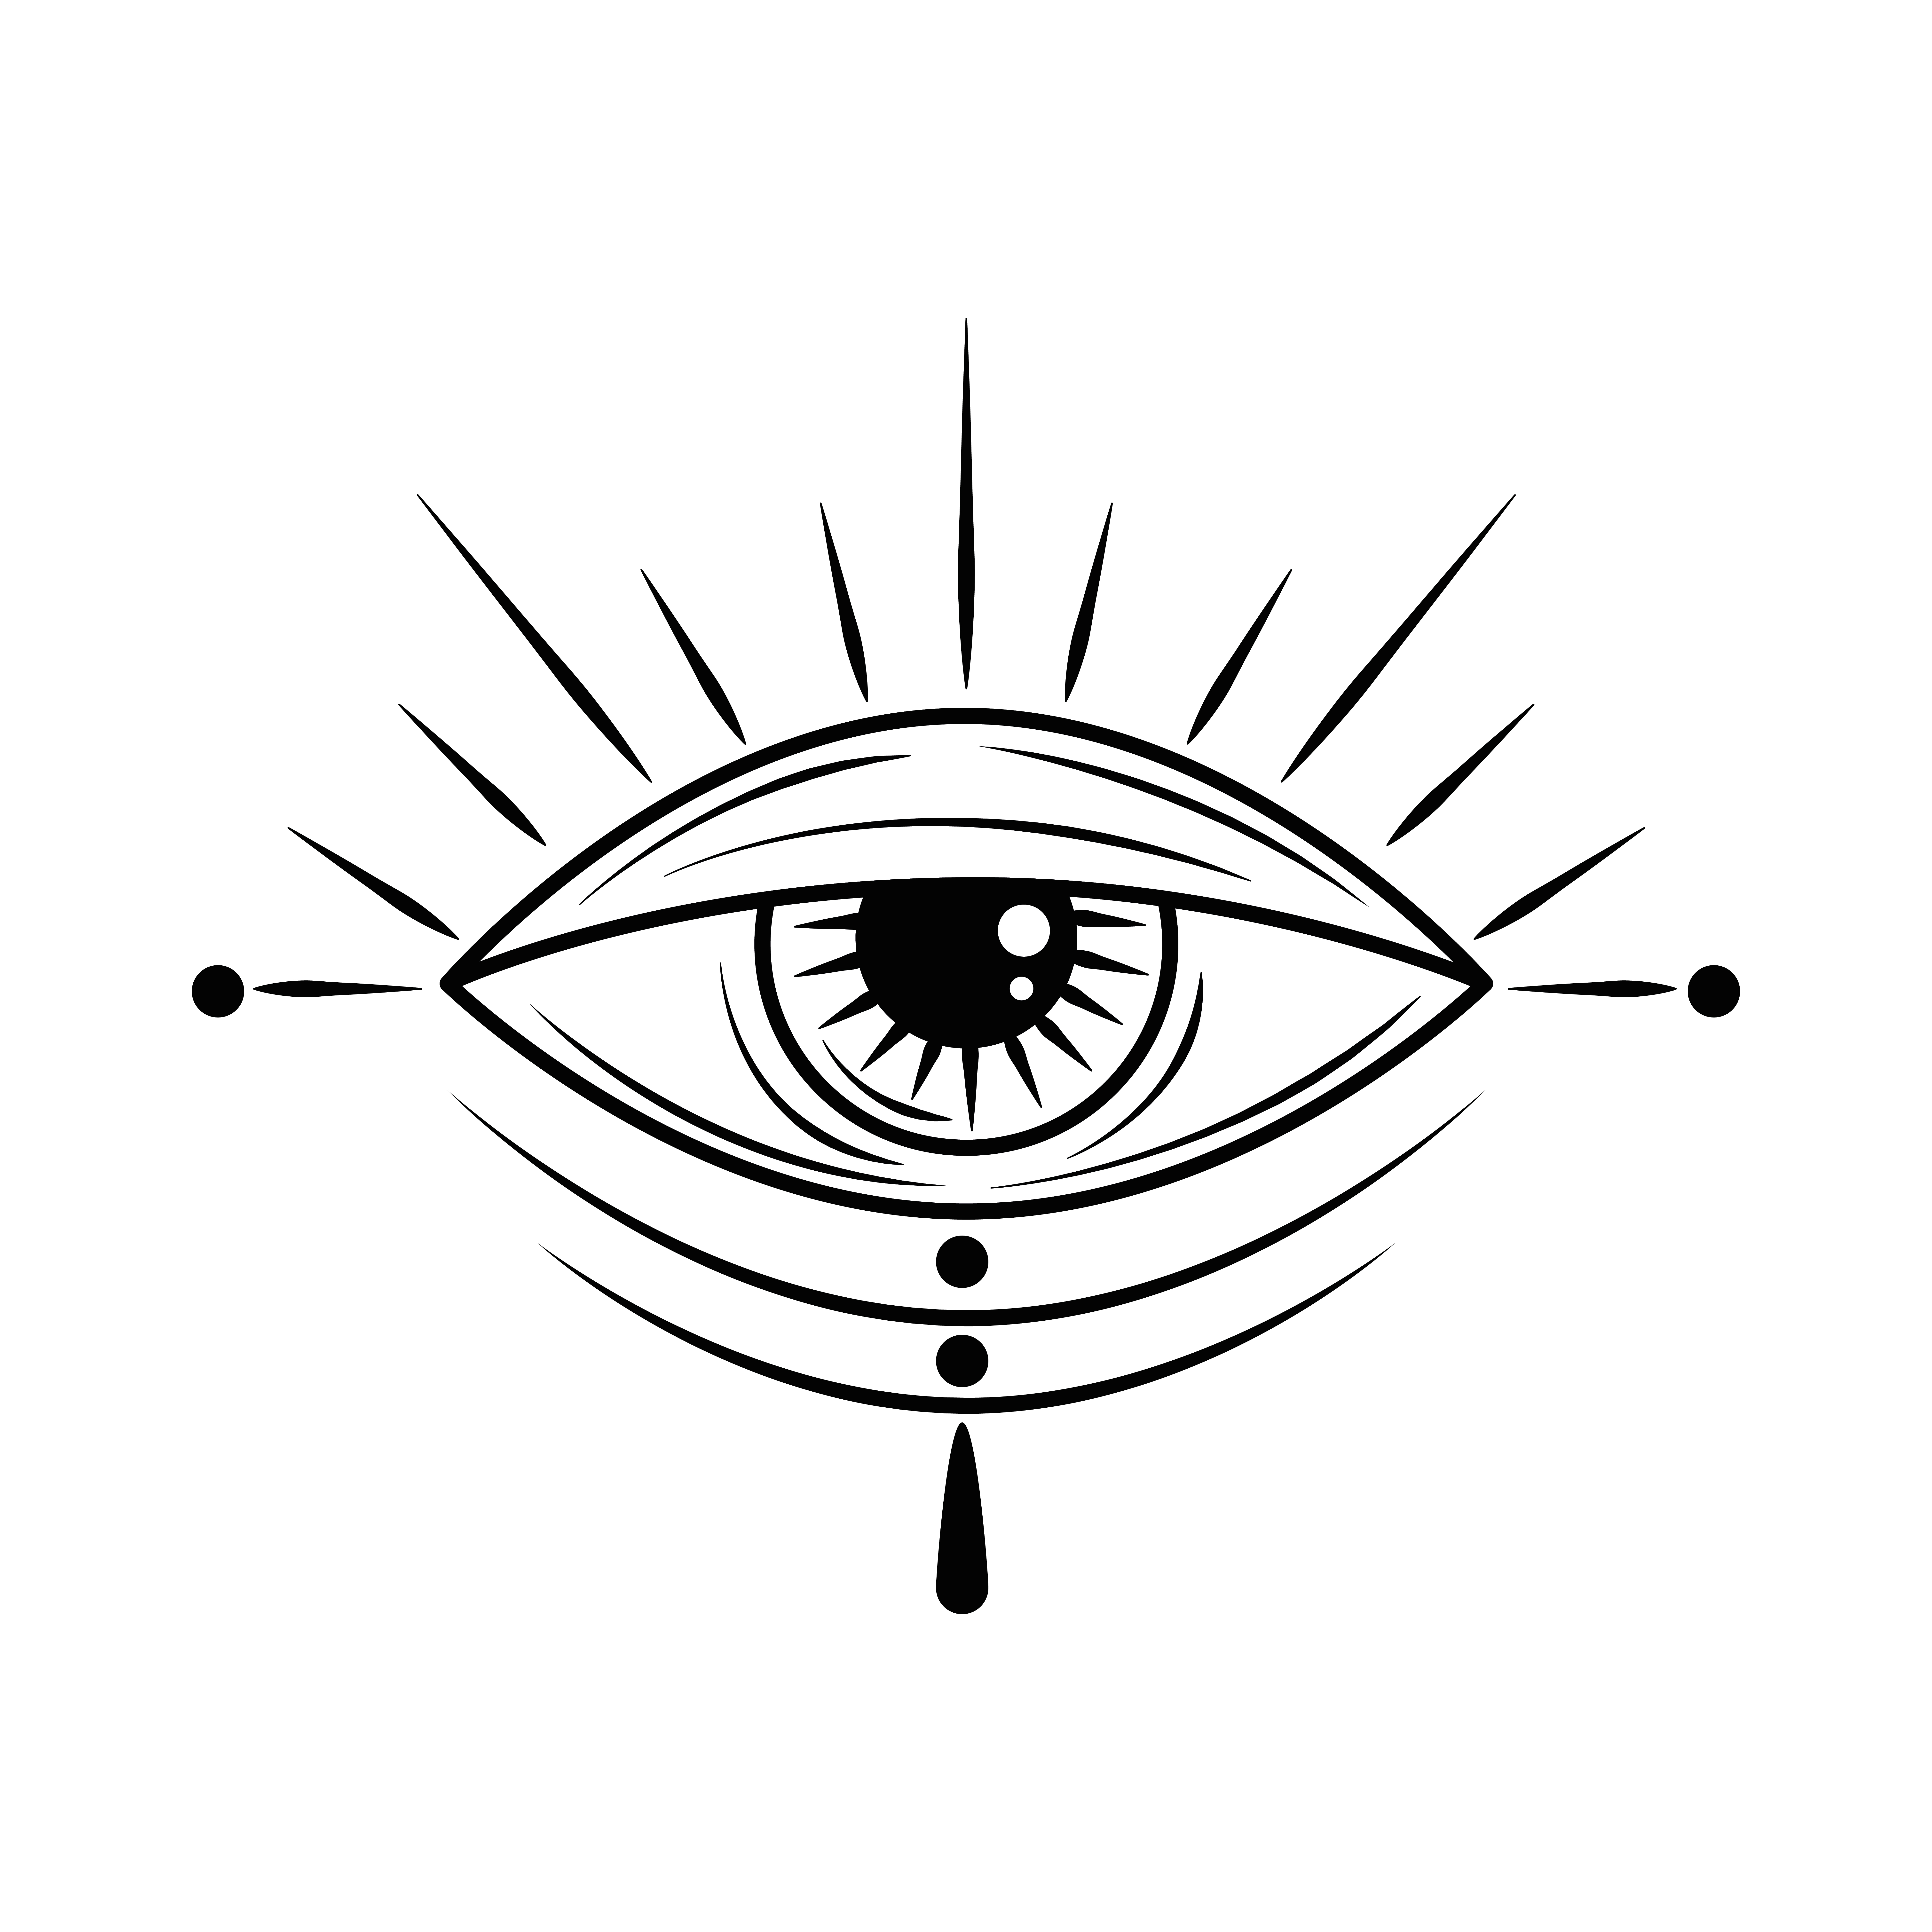 Traditional style eye tattoo located on the elbow